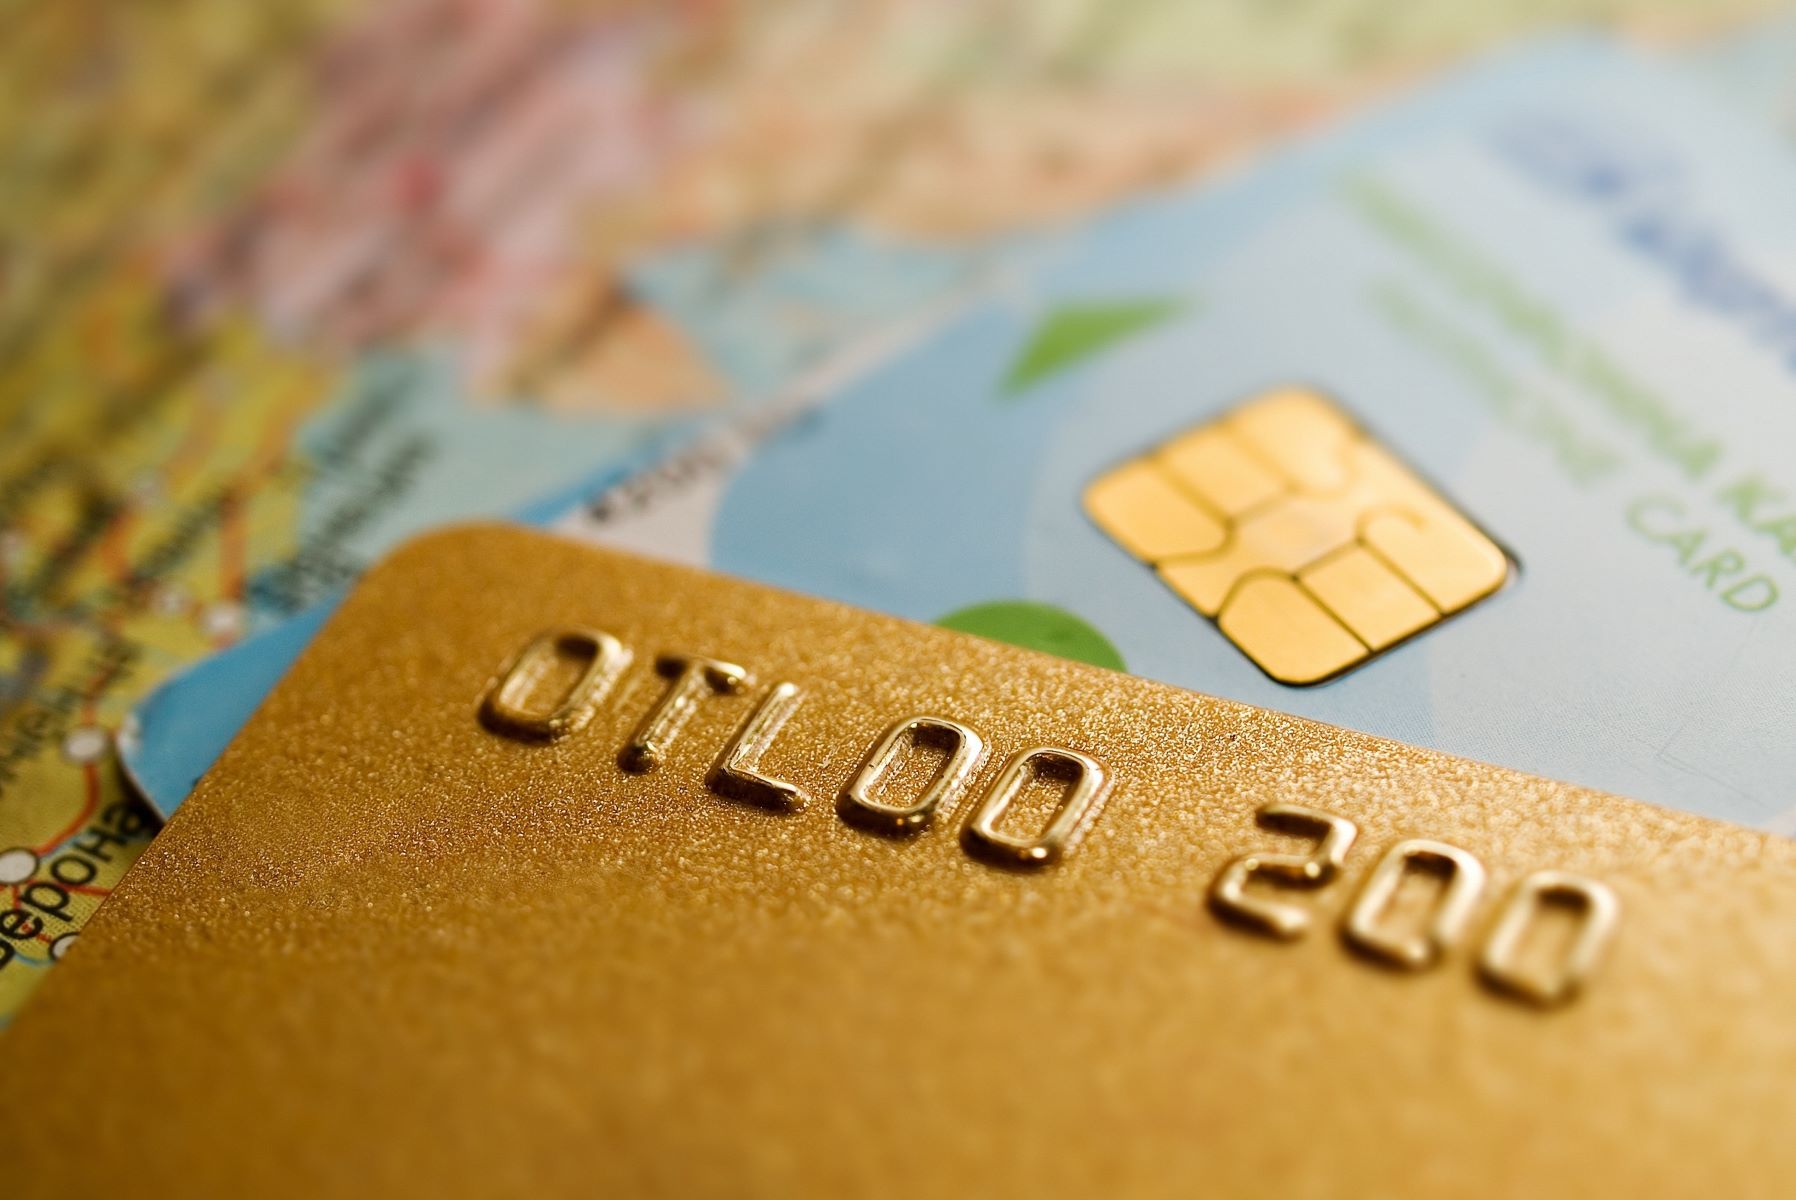 How To Use Credit Card Internationally